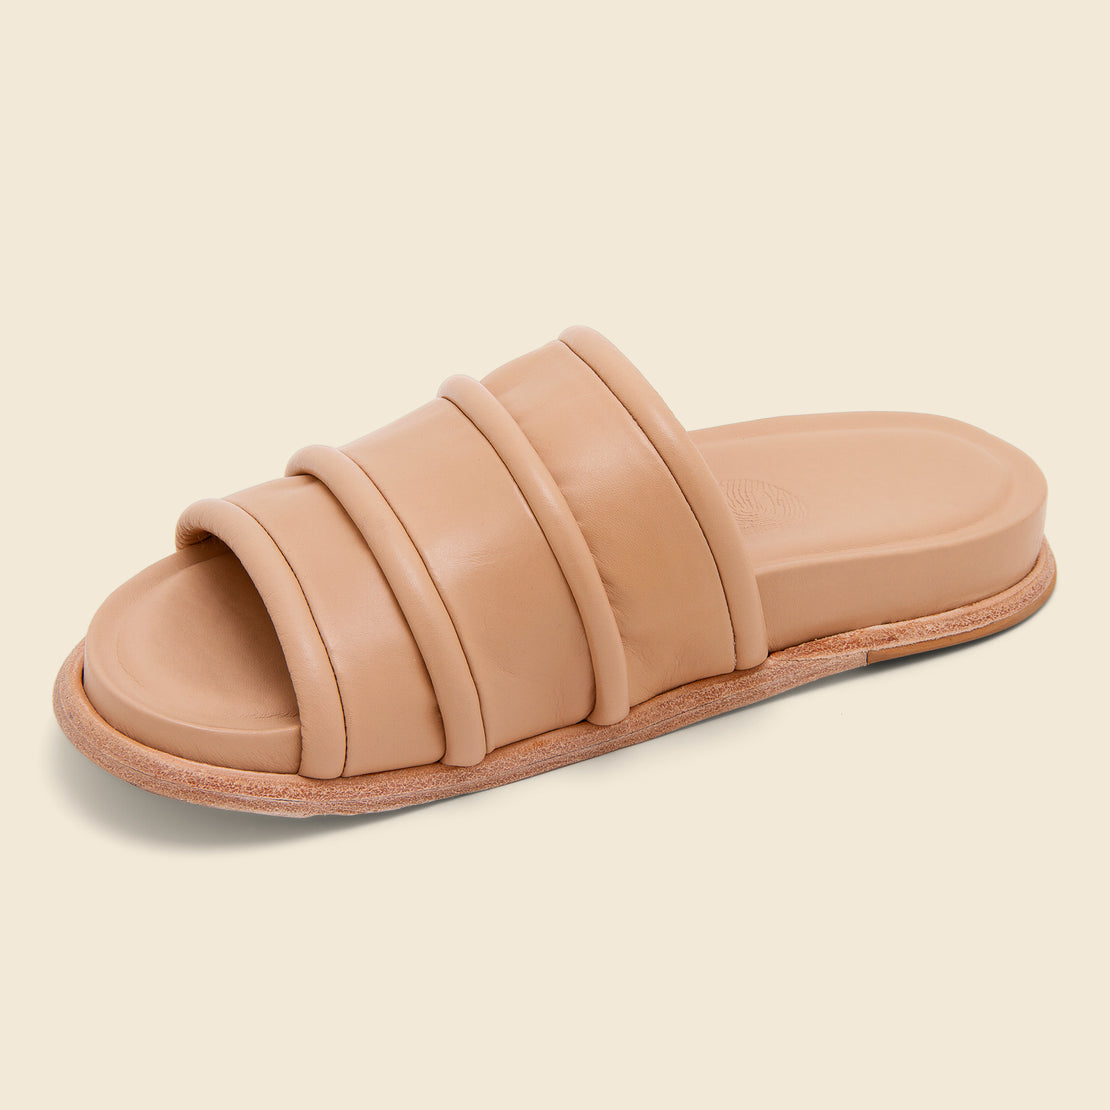 Lake Slide - Nude - Wal & Pai - STAG Provisions - W - Shoes - Sandals